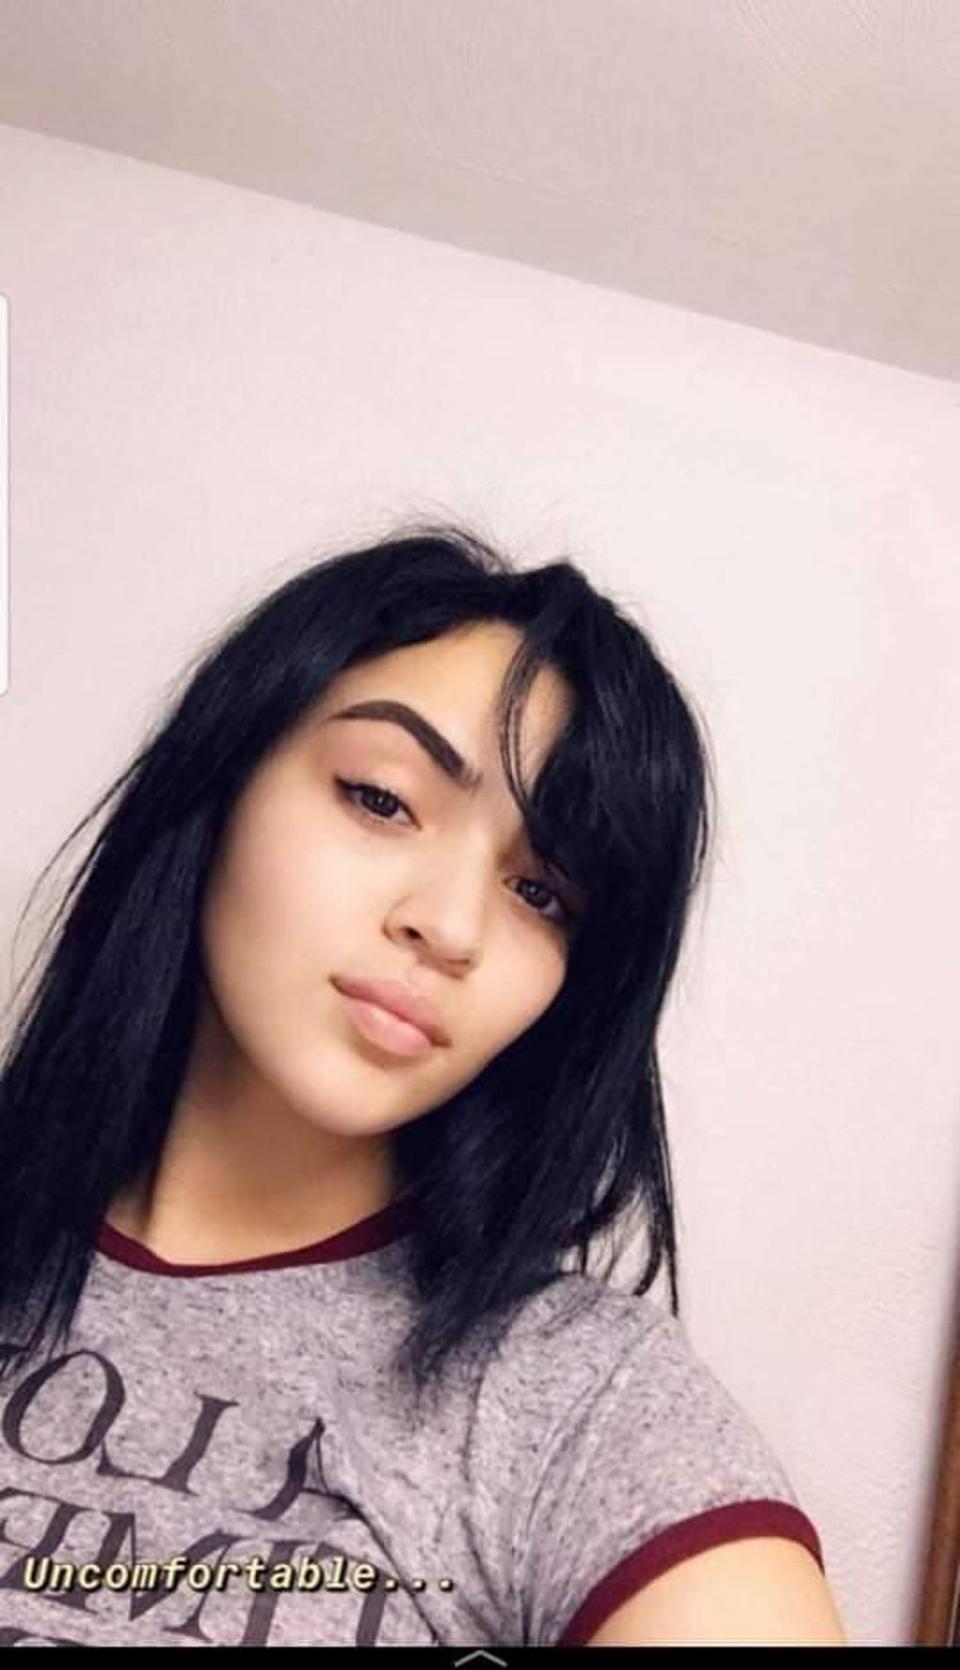 Lateche, 19, had been active on social media before dating Joseph Smith but he locked her out of her accounts and exhibited other isolating behaviour to keep the Indiana teenager from friends and family, her mother tells The Independent (Cheryl Walker)